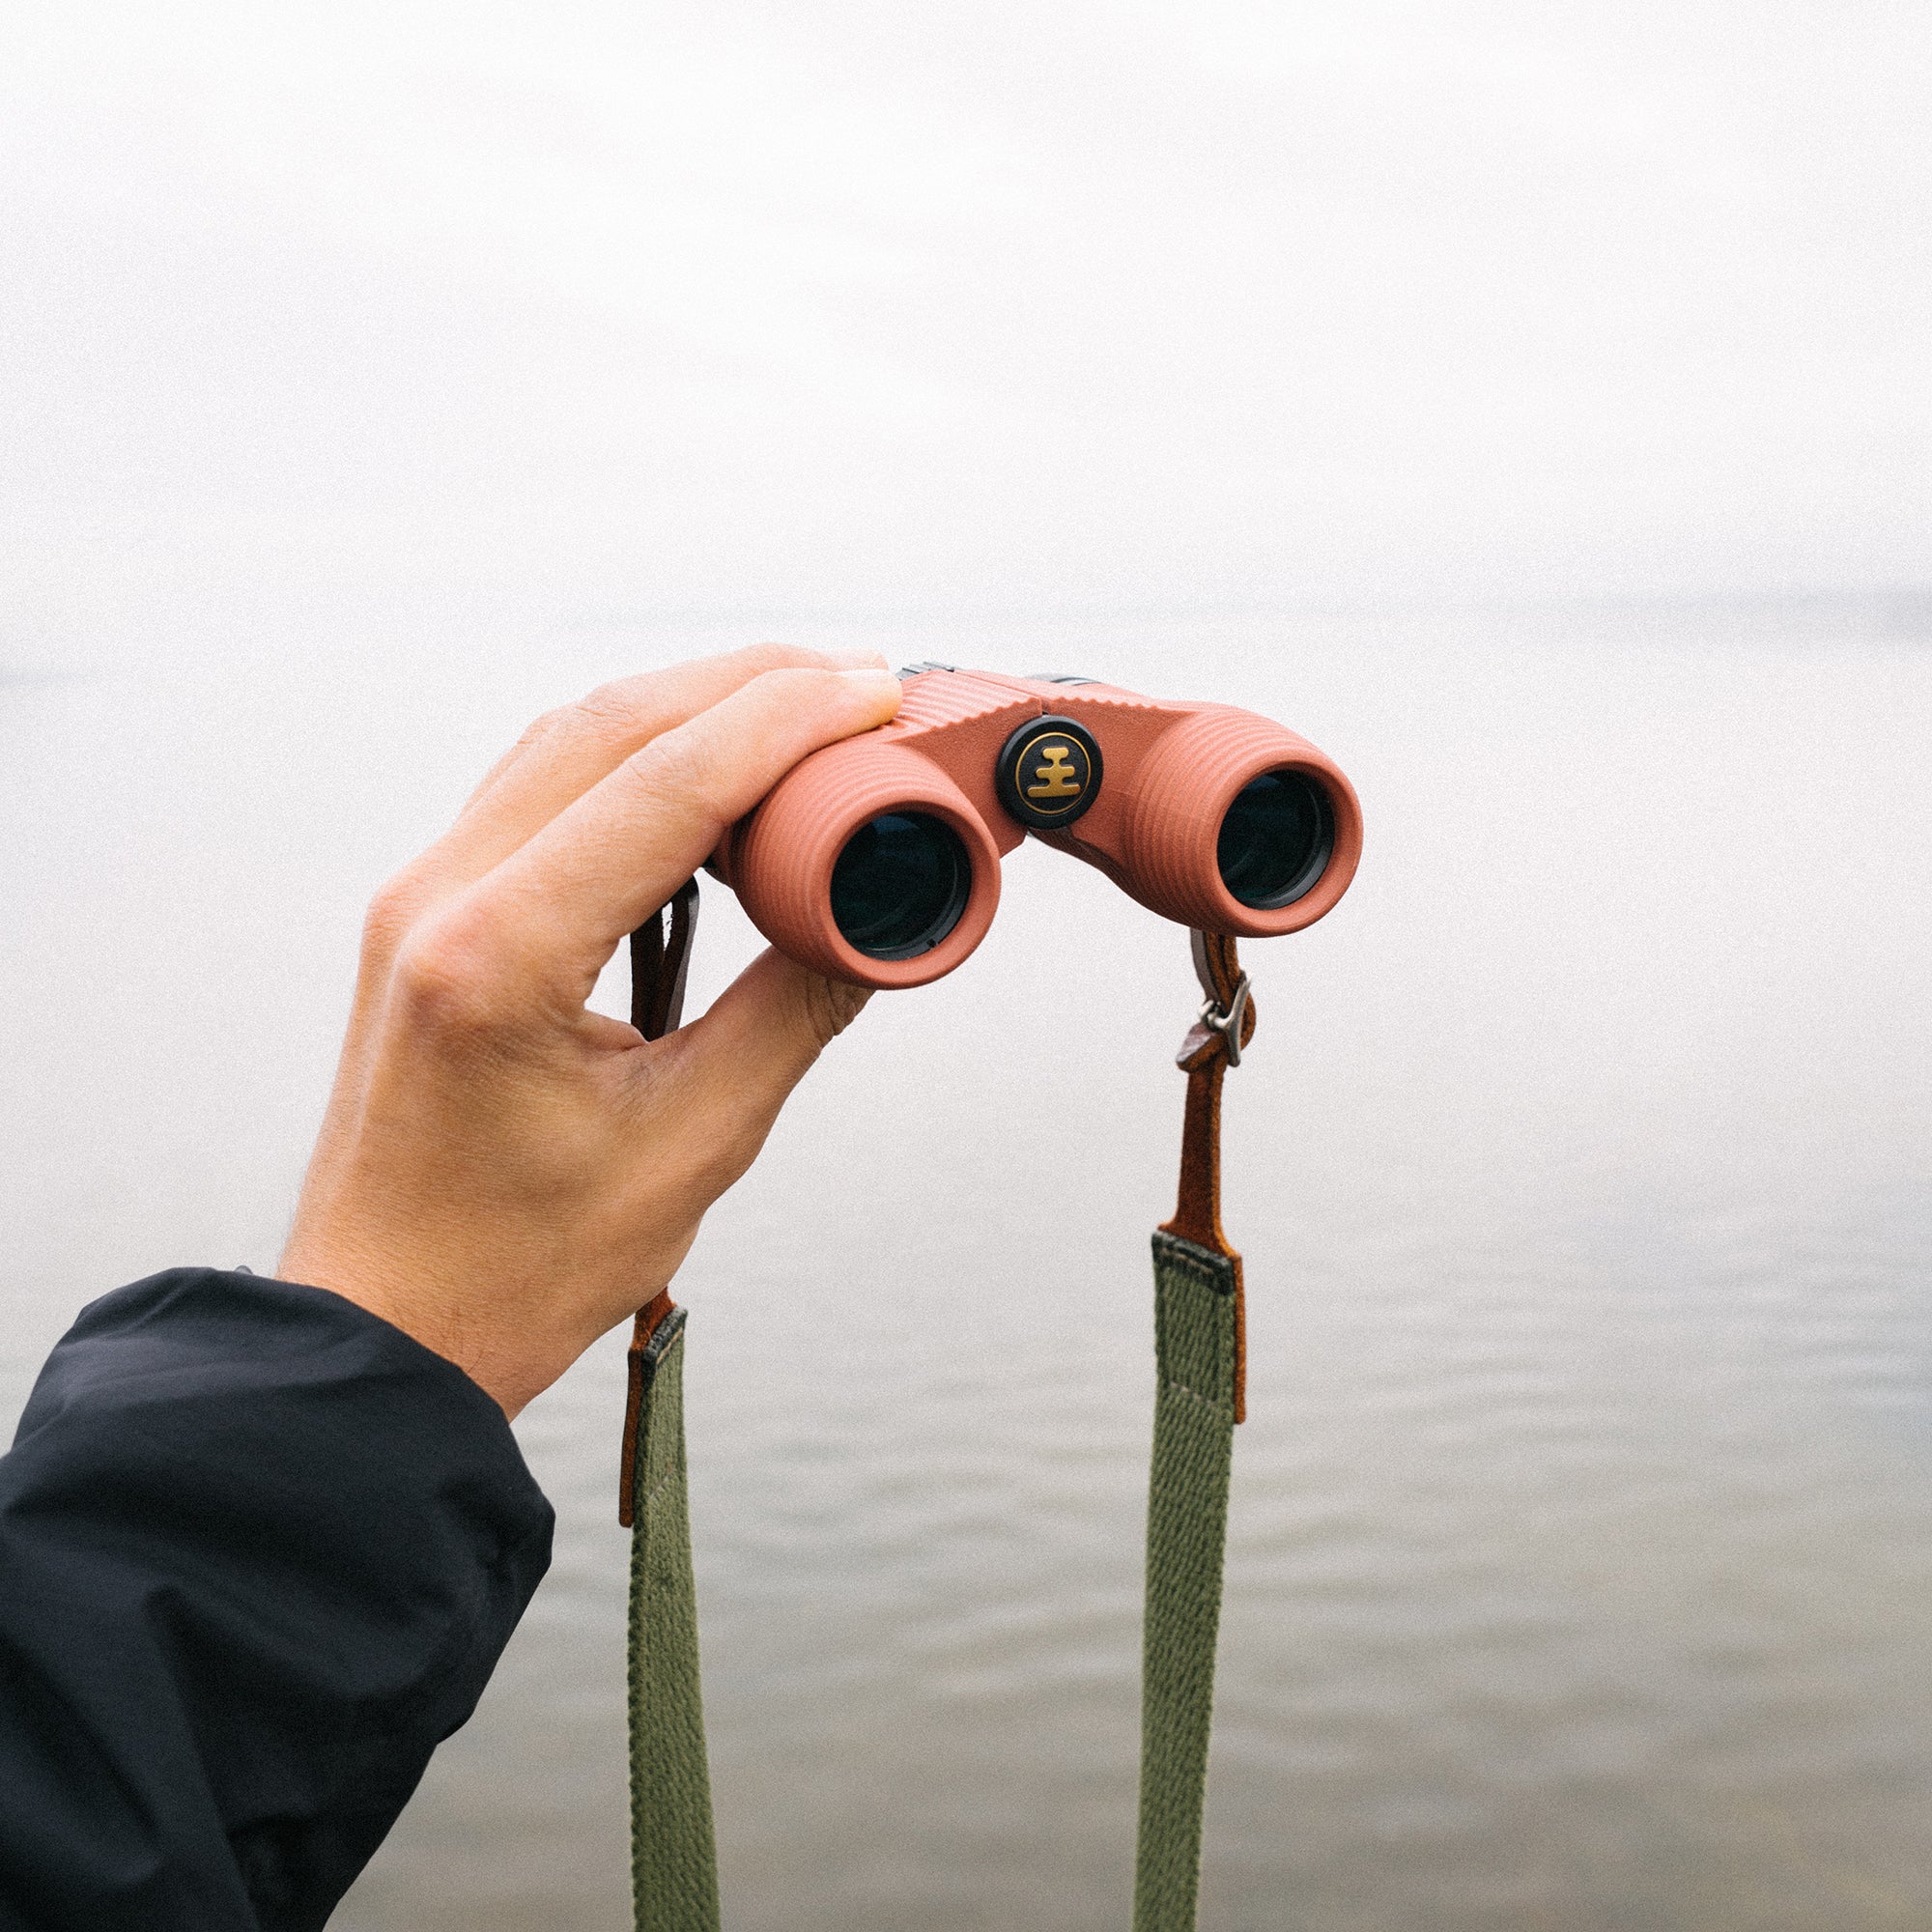 Person looking through Nocs compact waterproof and fogproof binoculars in a wet and foggy setting